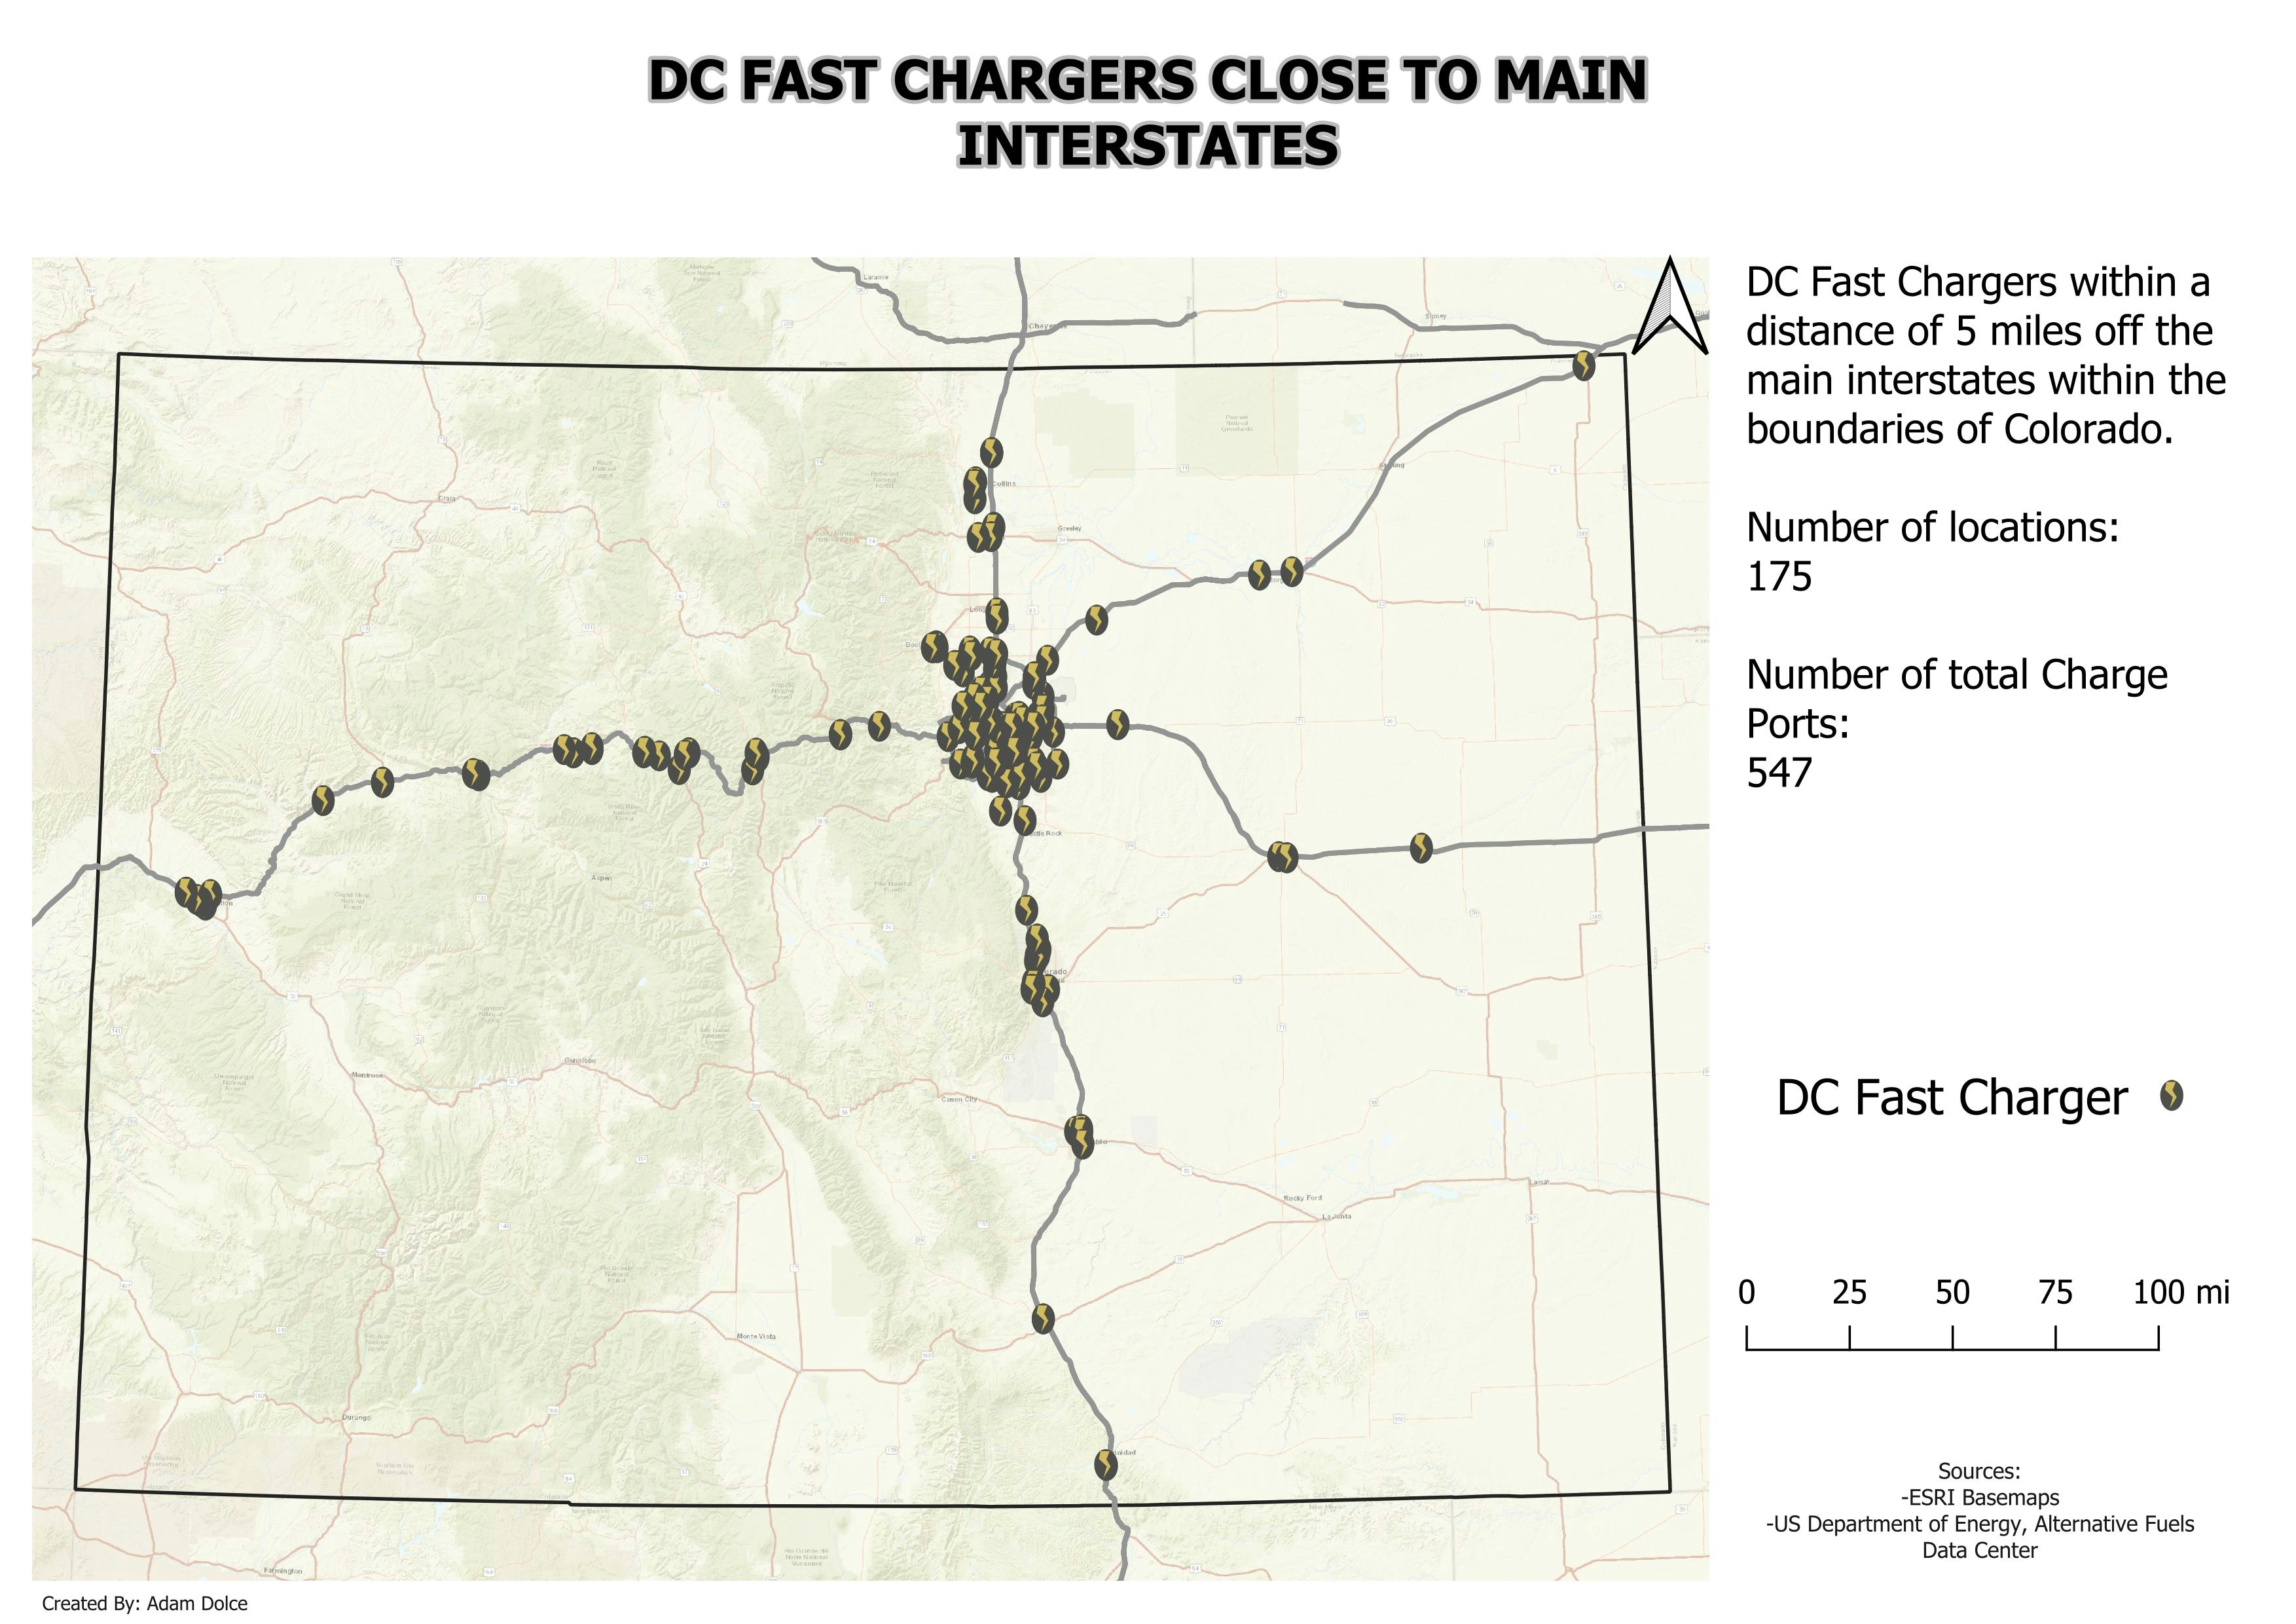 DC Fast Chargers Near Interstate